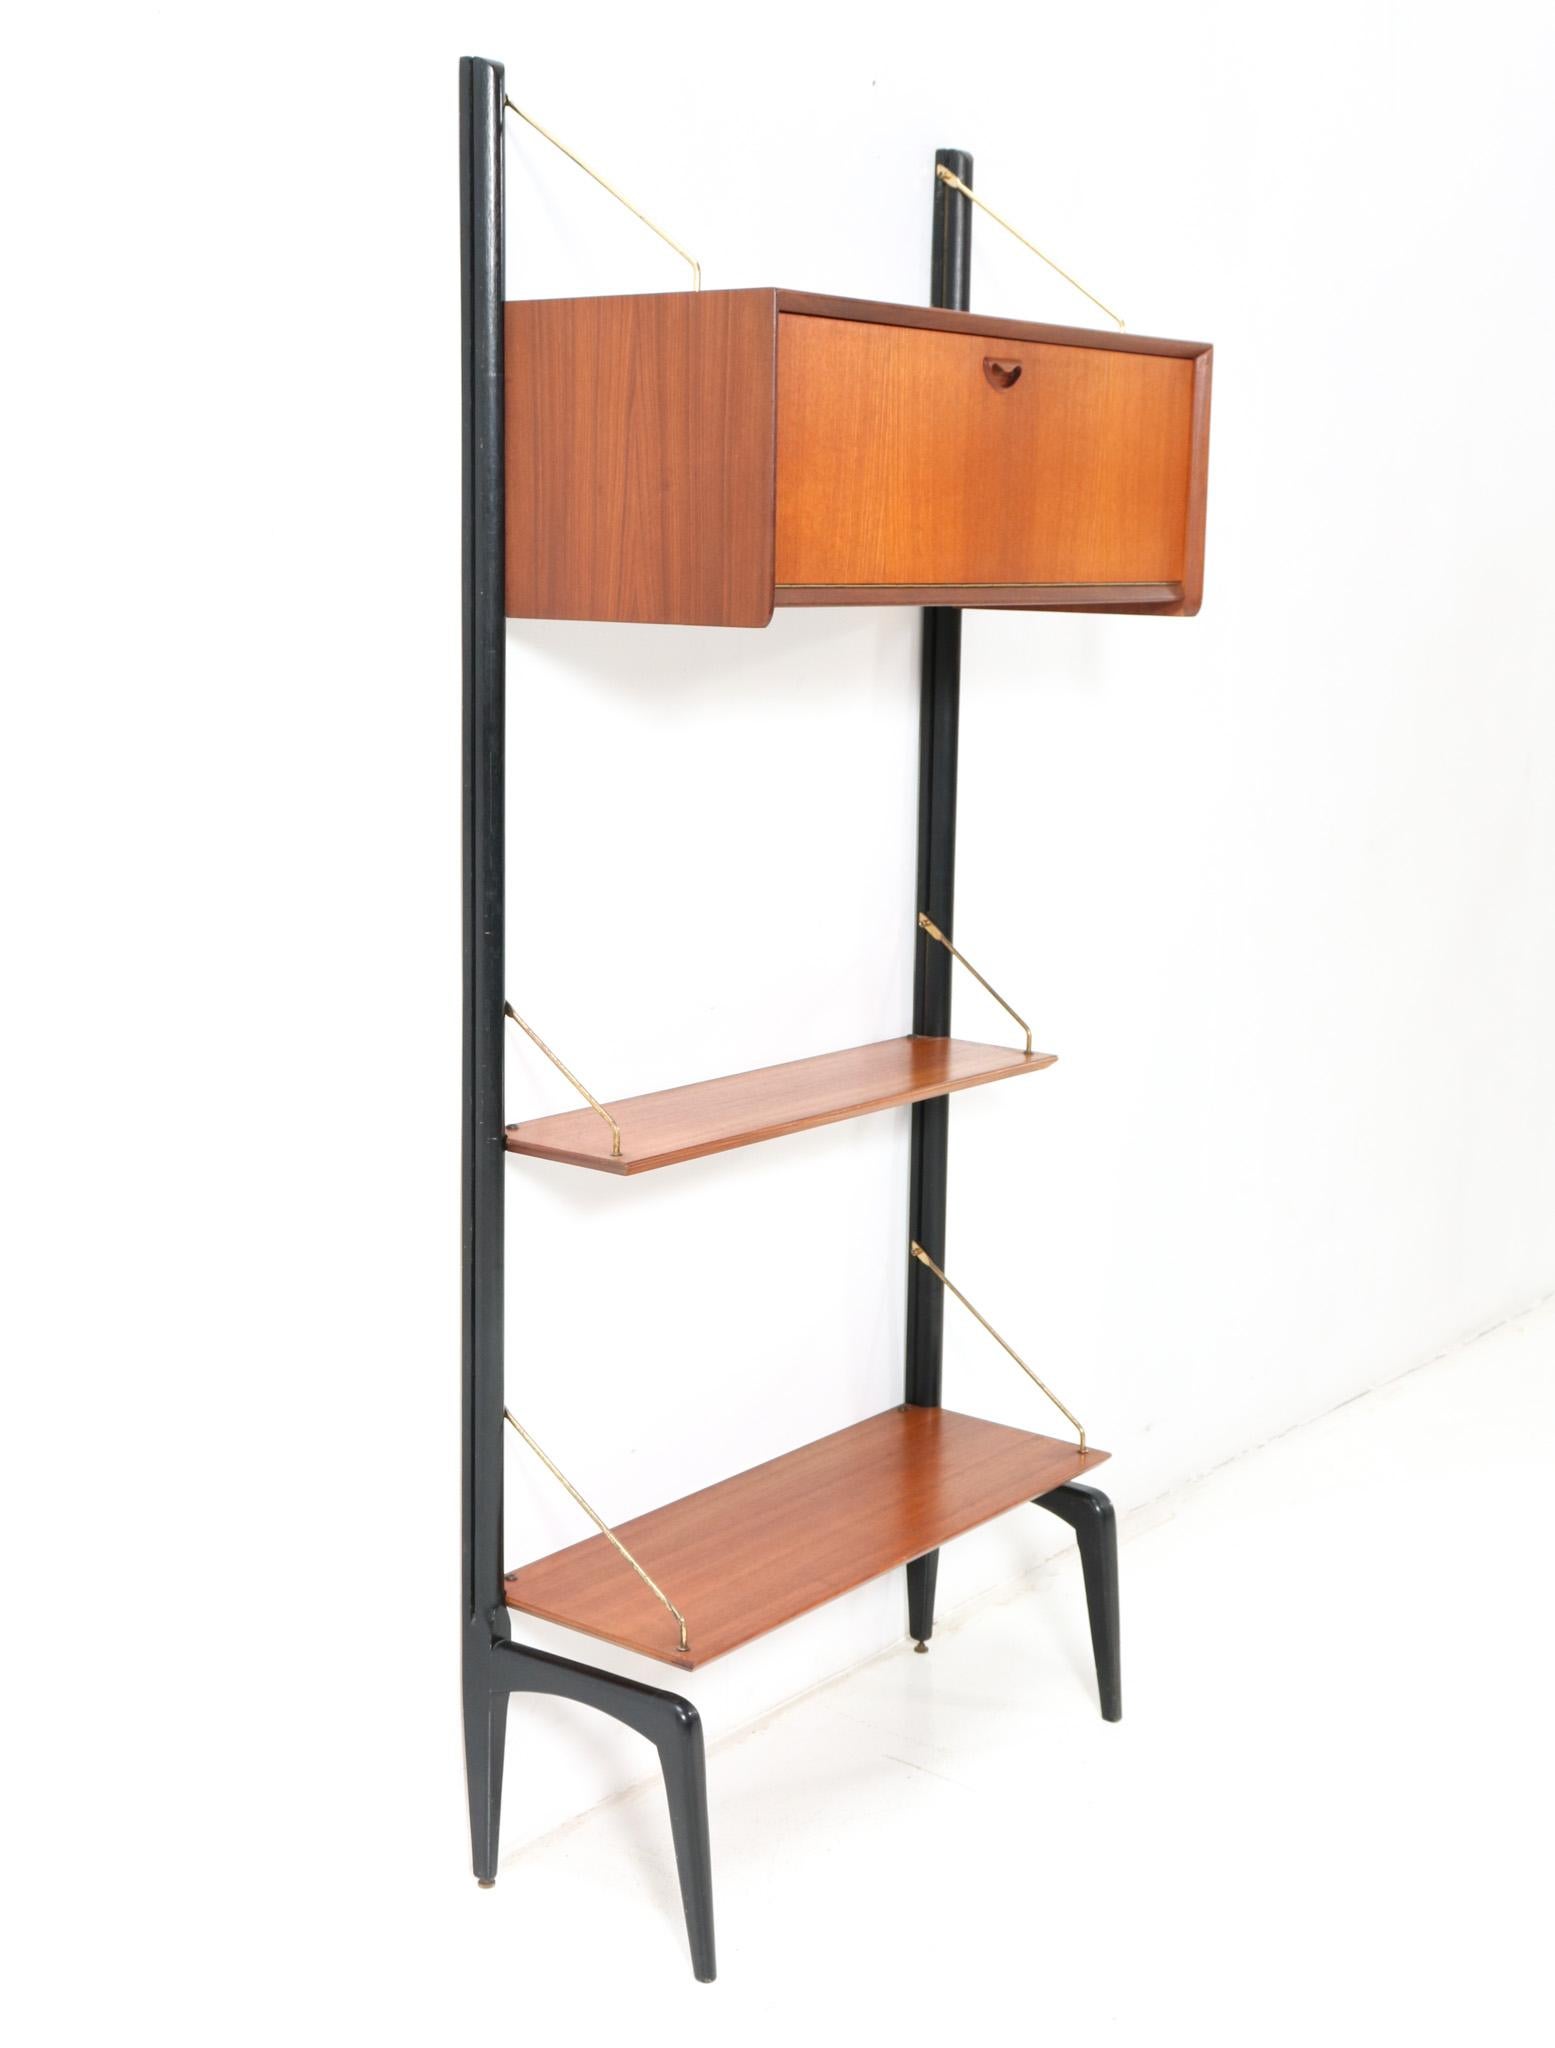 Magnificent and rare Mid-Century Modern free standing modular wall unit.
Design by Louis van Teeffelen for WéBé.
Striking Dutch design from the 1950s.
This wonderful Mid-Century Modern free standing wall unit by Louis van Teeffelen for WéBé is in